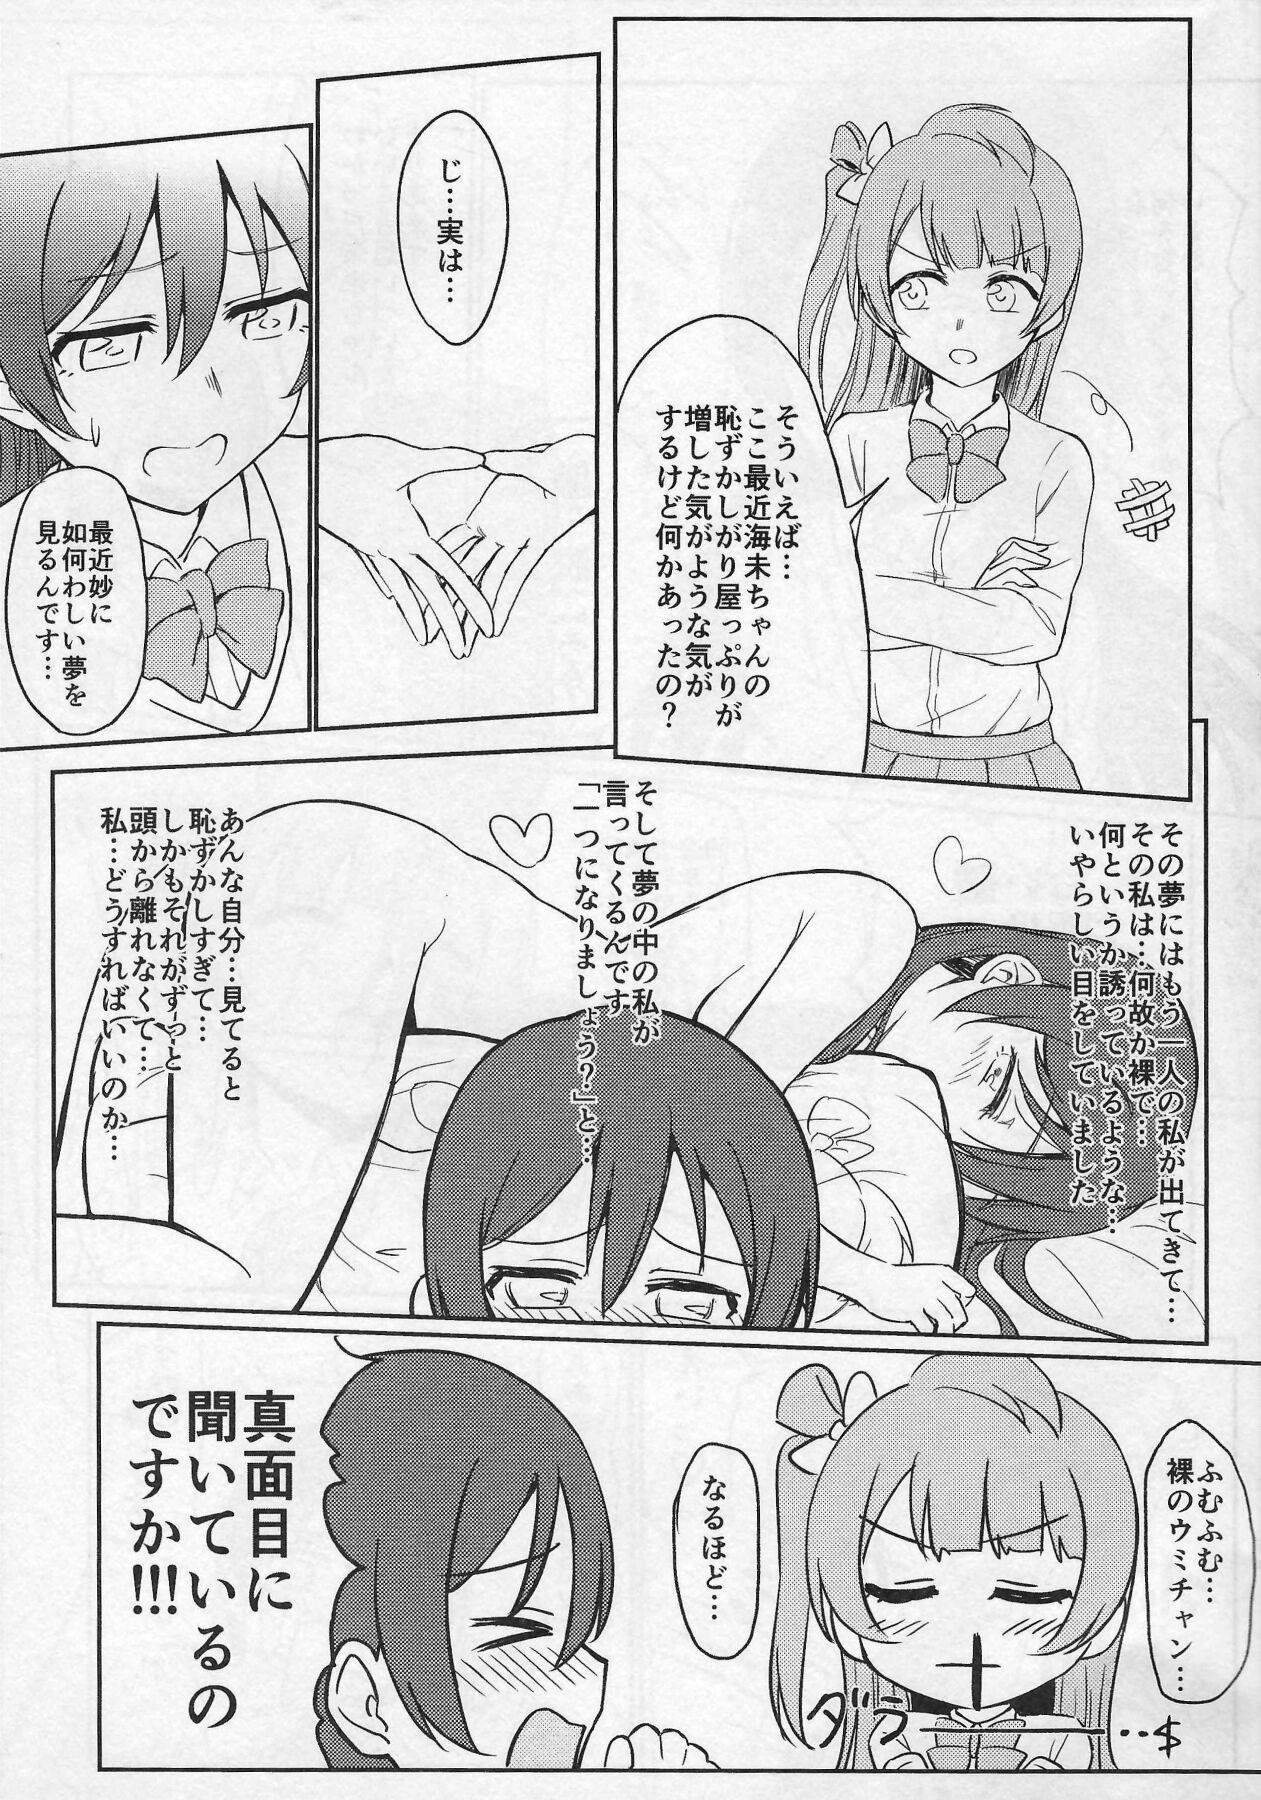 Groupsex Shame on UMI! - Love live Cum Swallow - Page 10